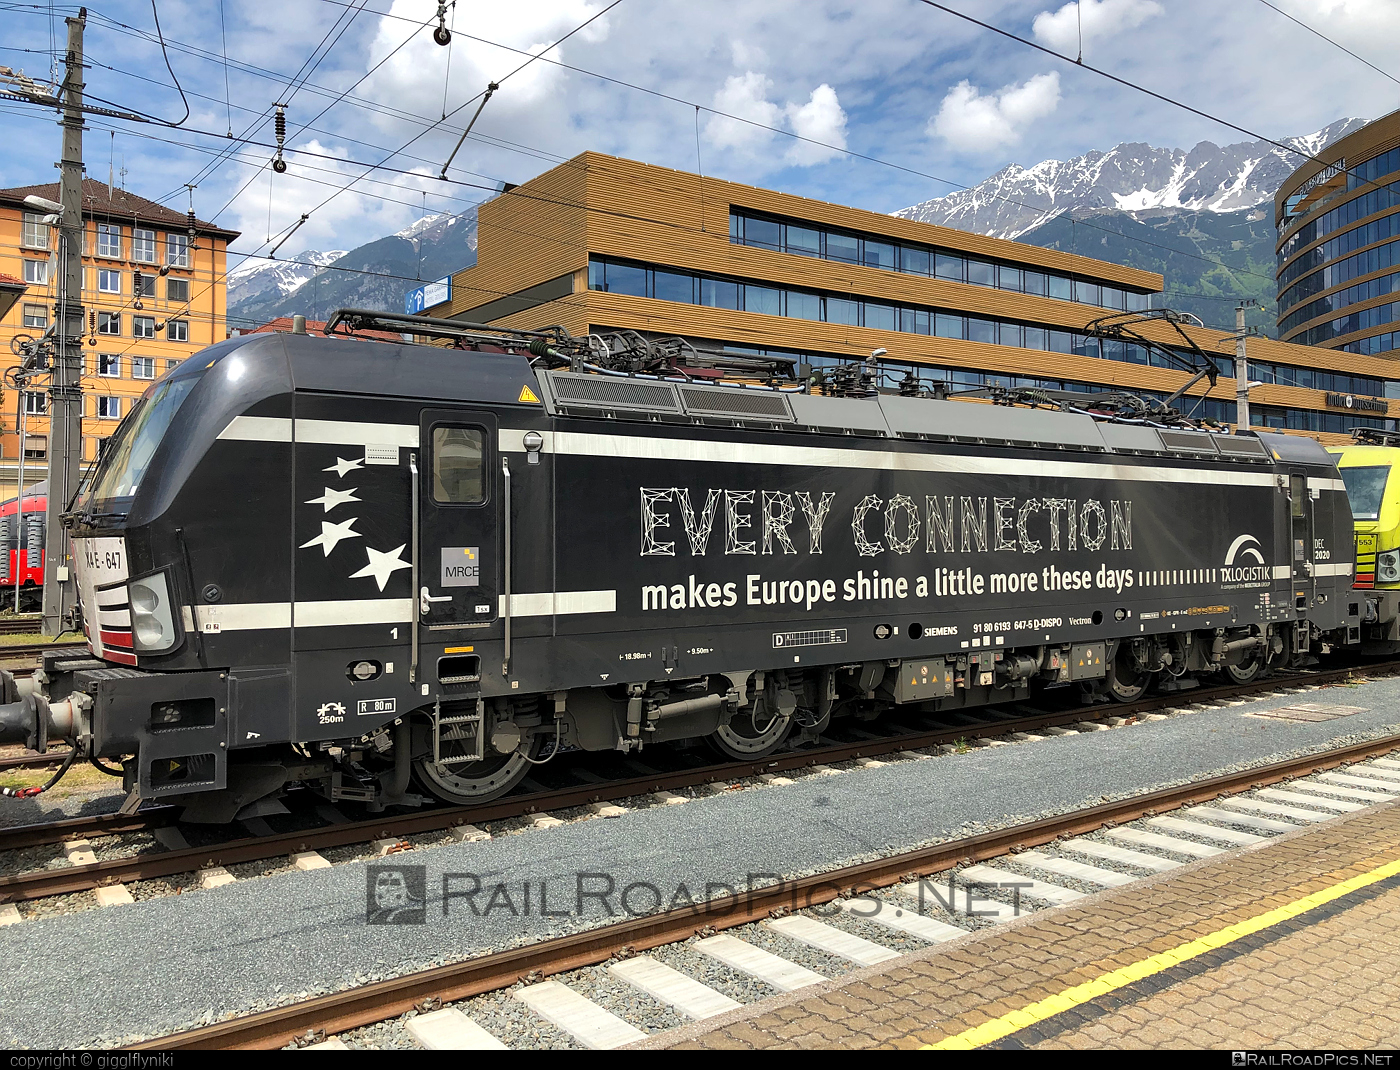 Siemens Vectron MS - 193 647 operated by TXLogistik #dispolok #mitsuirailcapitaleurope #mitsuirailcapitaleuropegmbh #mrce #siemens #siemensVectron #siemensVectronMS #txlogistik #vectron #vectronMS